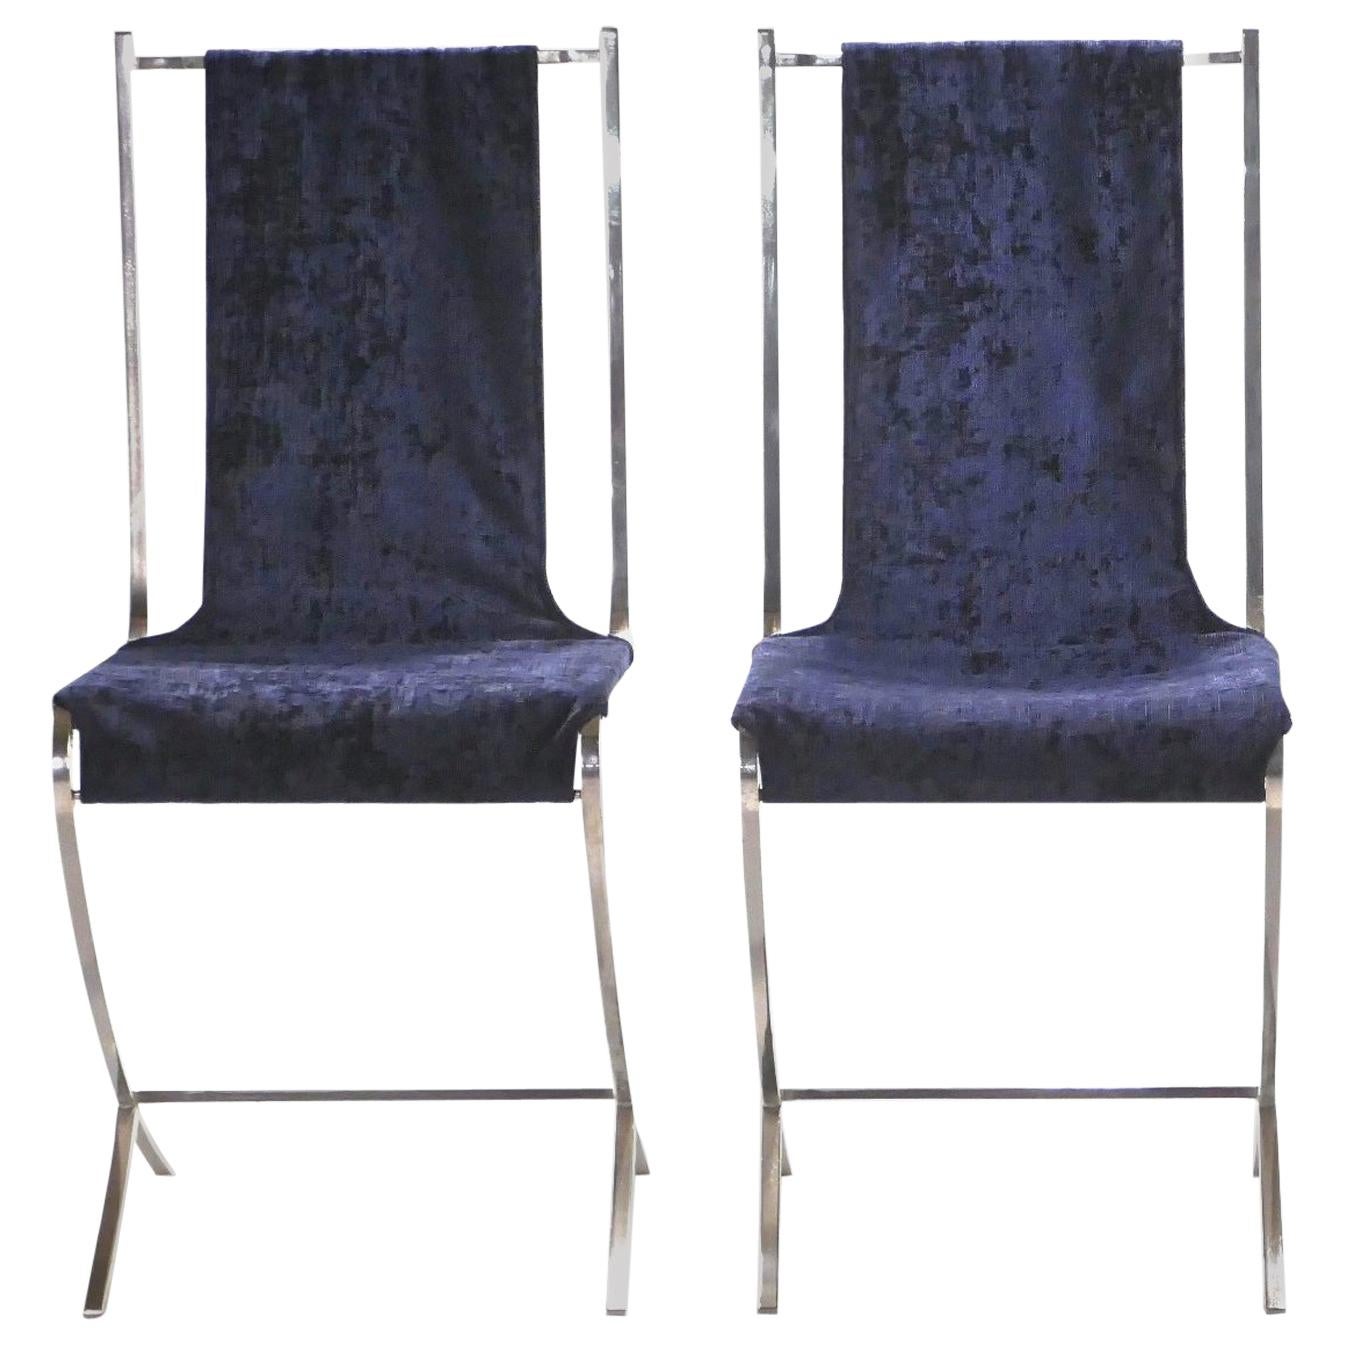 Rare Pair of Chairs by Pierre Cardin for Maison Jansen, 1970s